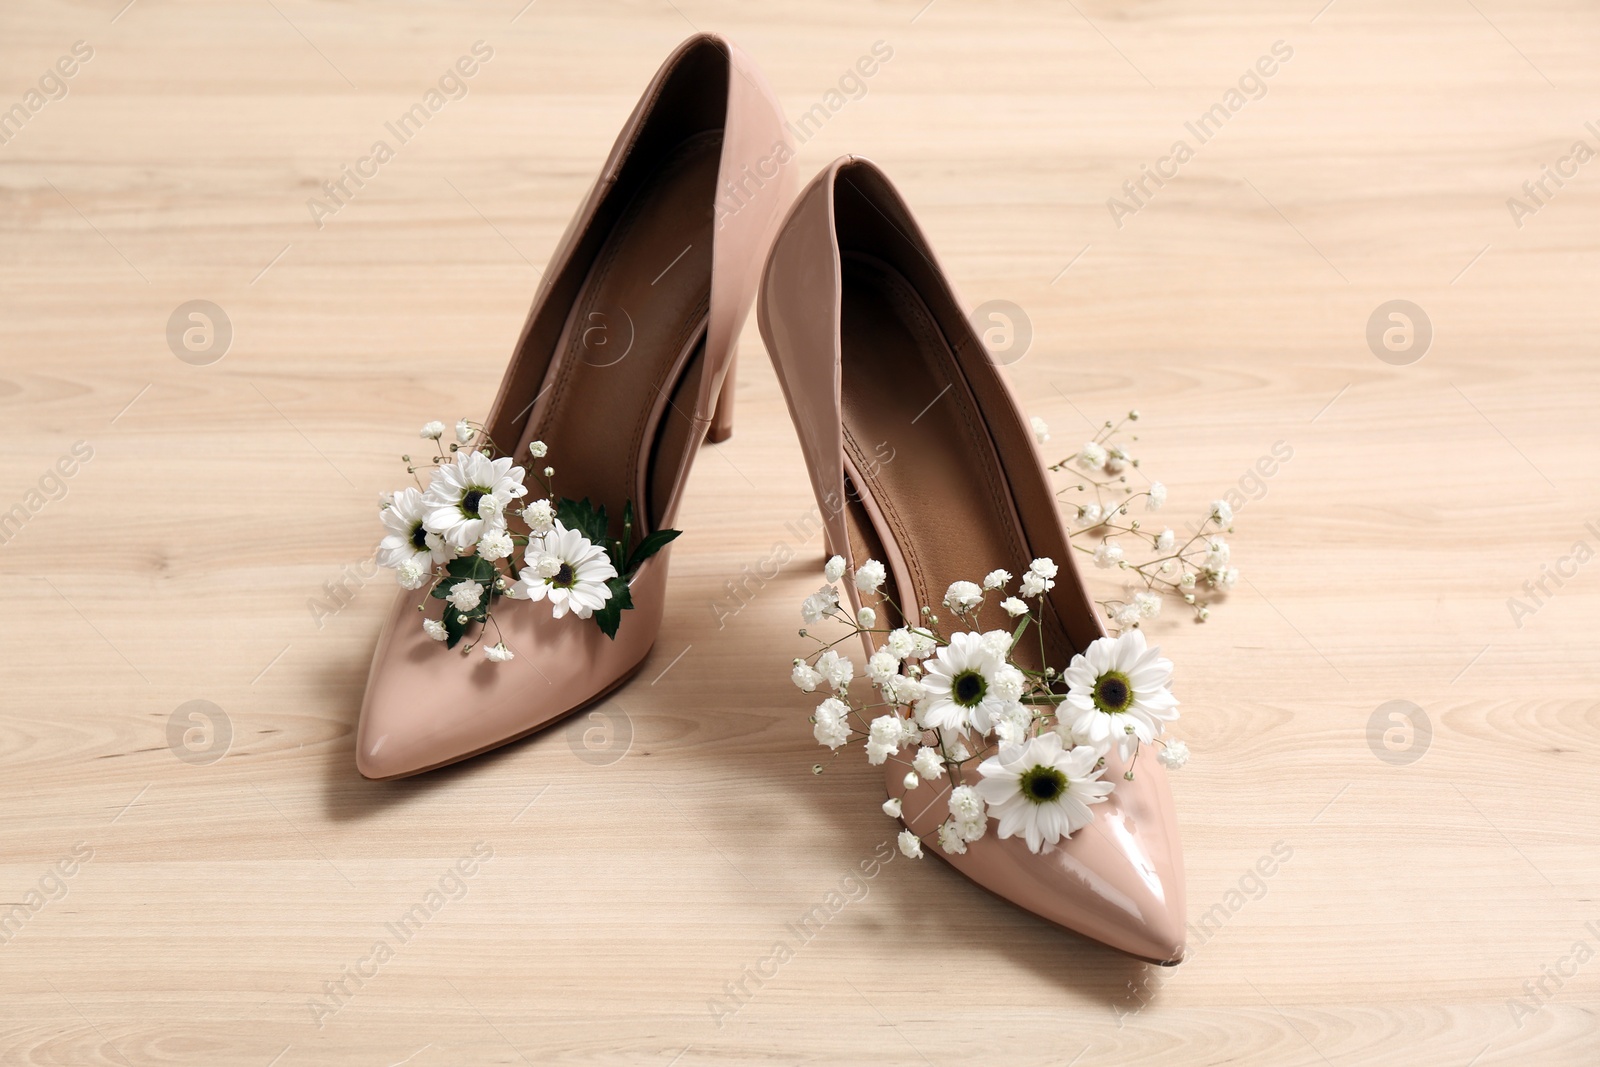 Photo of Women's shoes with beautiful flowers on wooden surface